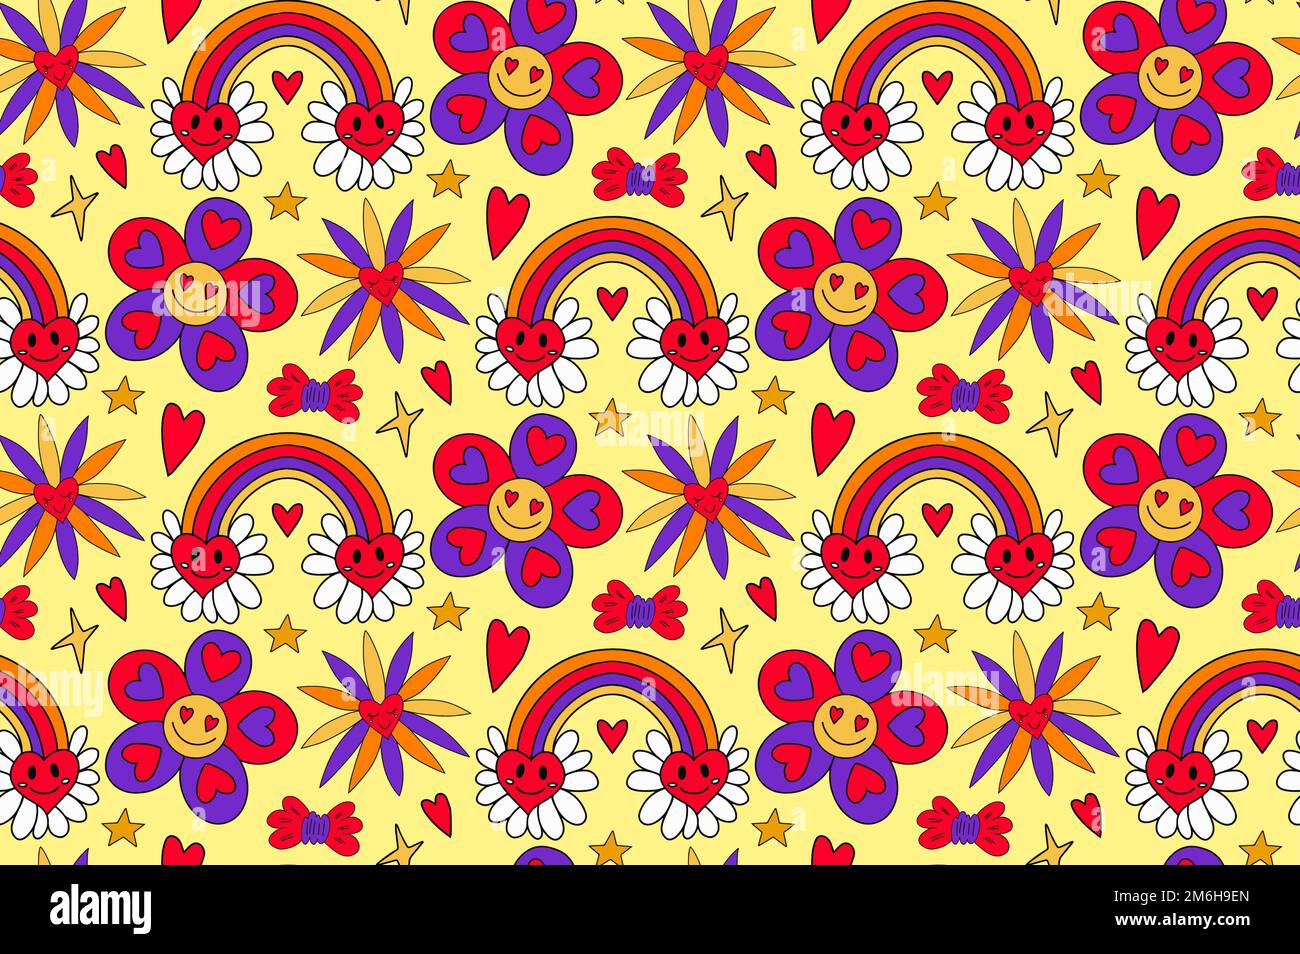 Seamless pattern in trendy retro groovy style. With valentines day